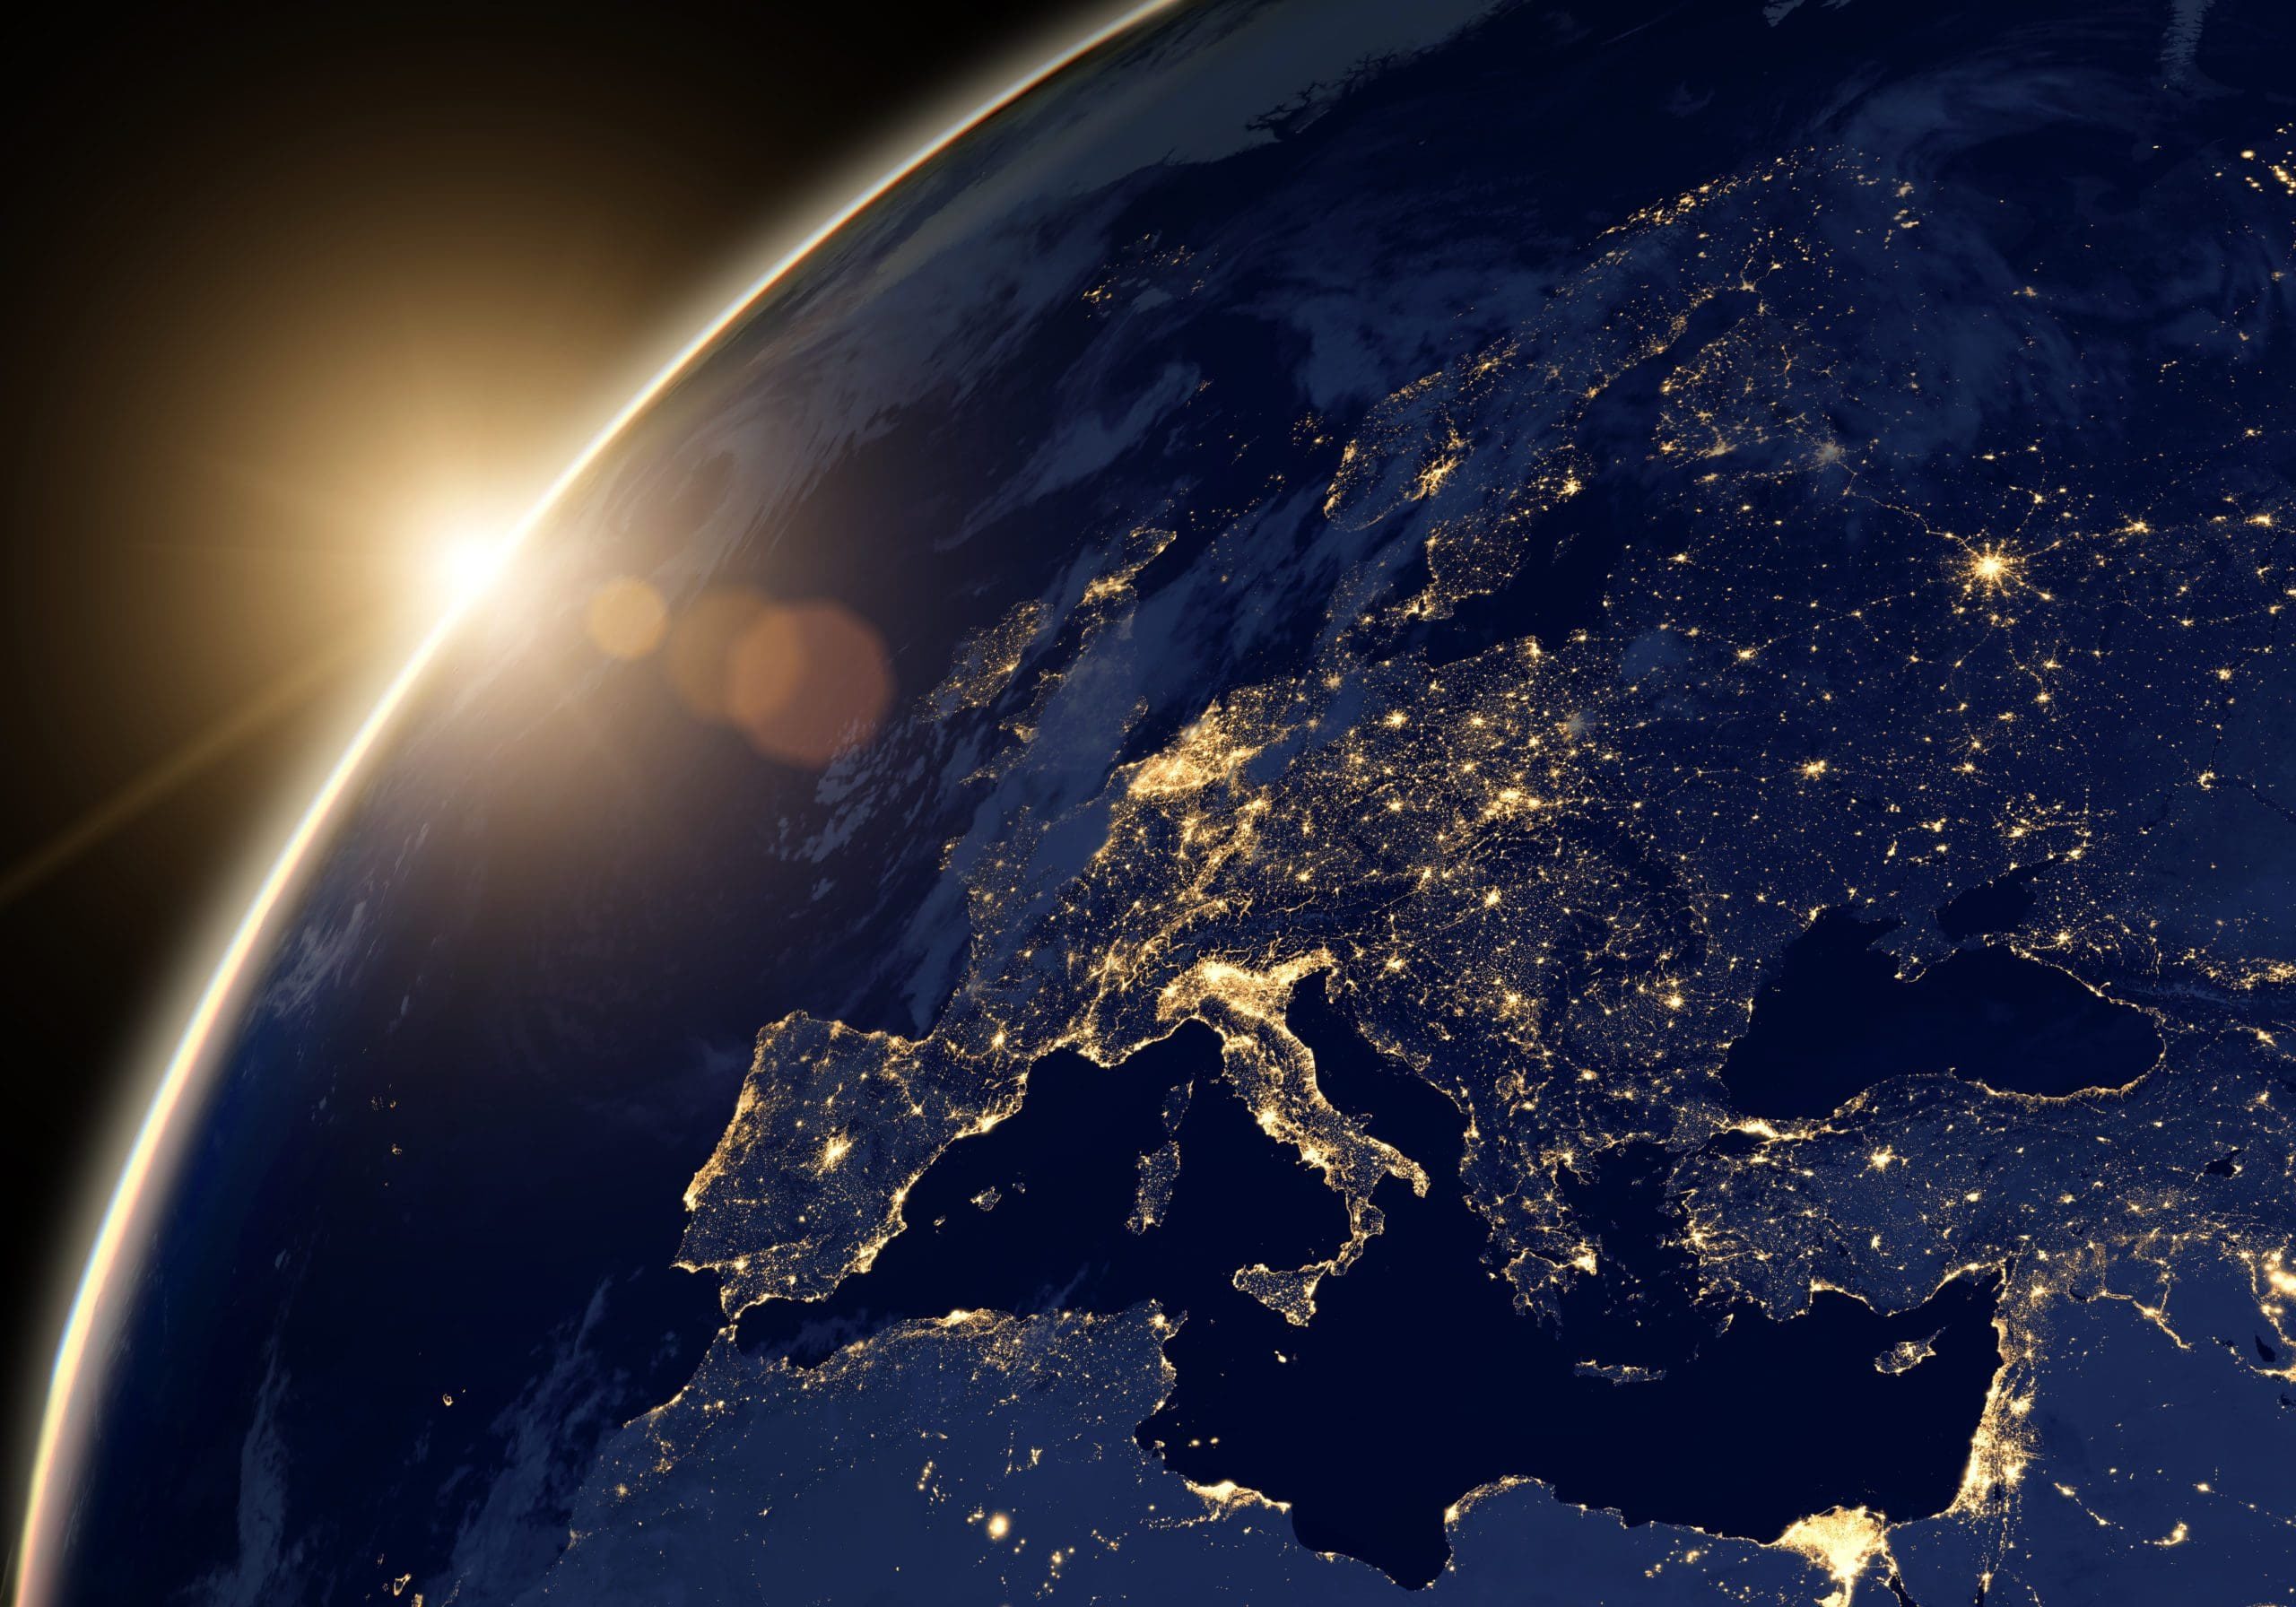 Planet Earth at night, view of city lights showing human activity in Europe and Middle East from space. World map on dark globe at sunrise on satellite photo. Elements of this image furnished by NASA.